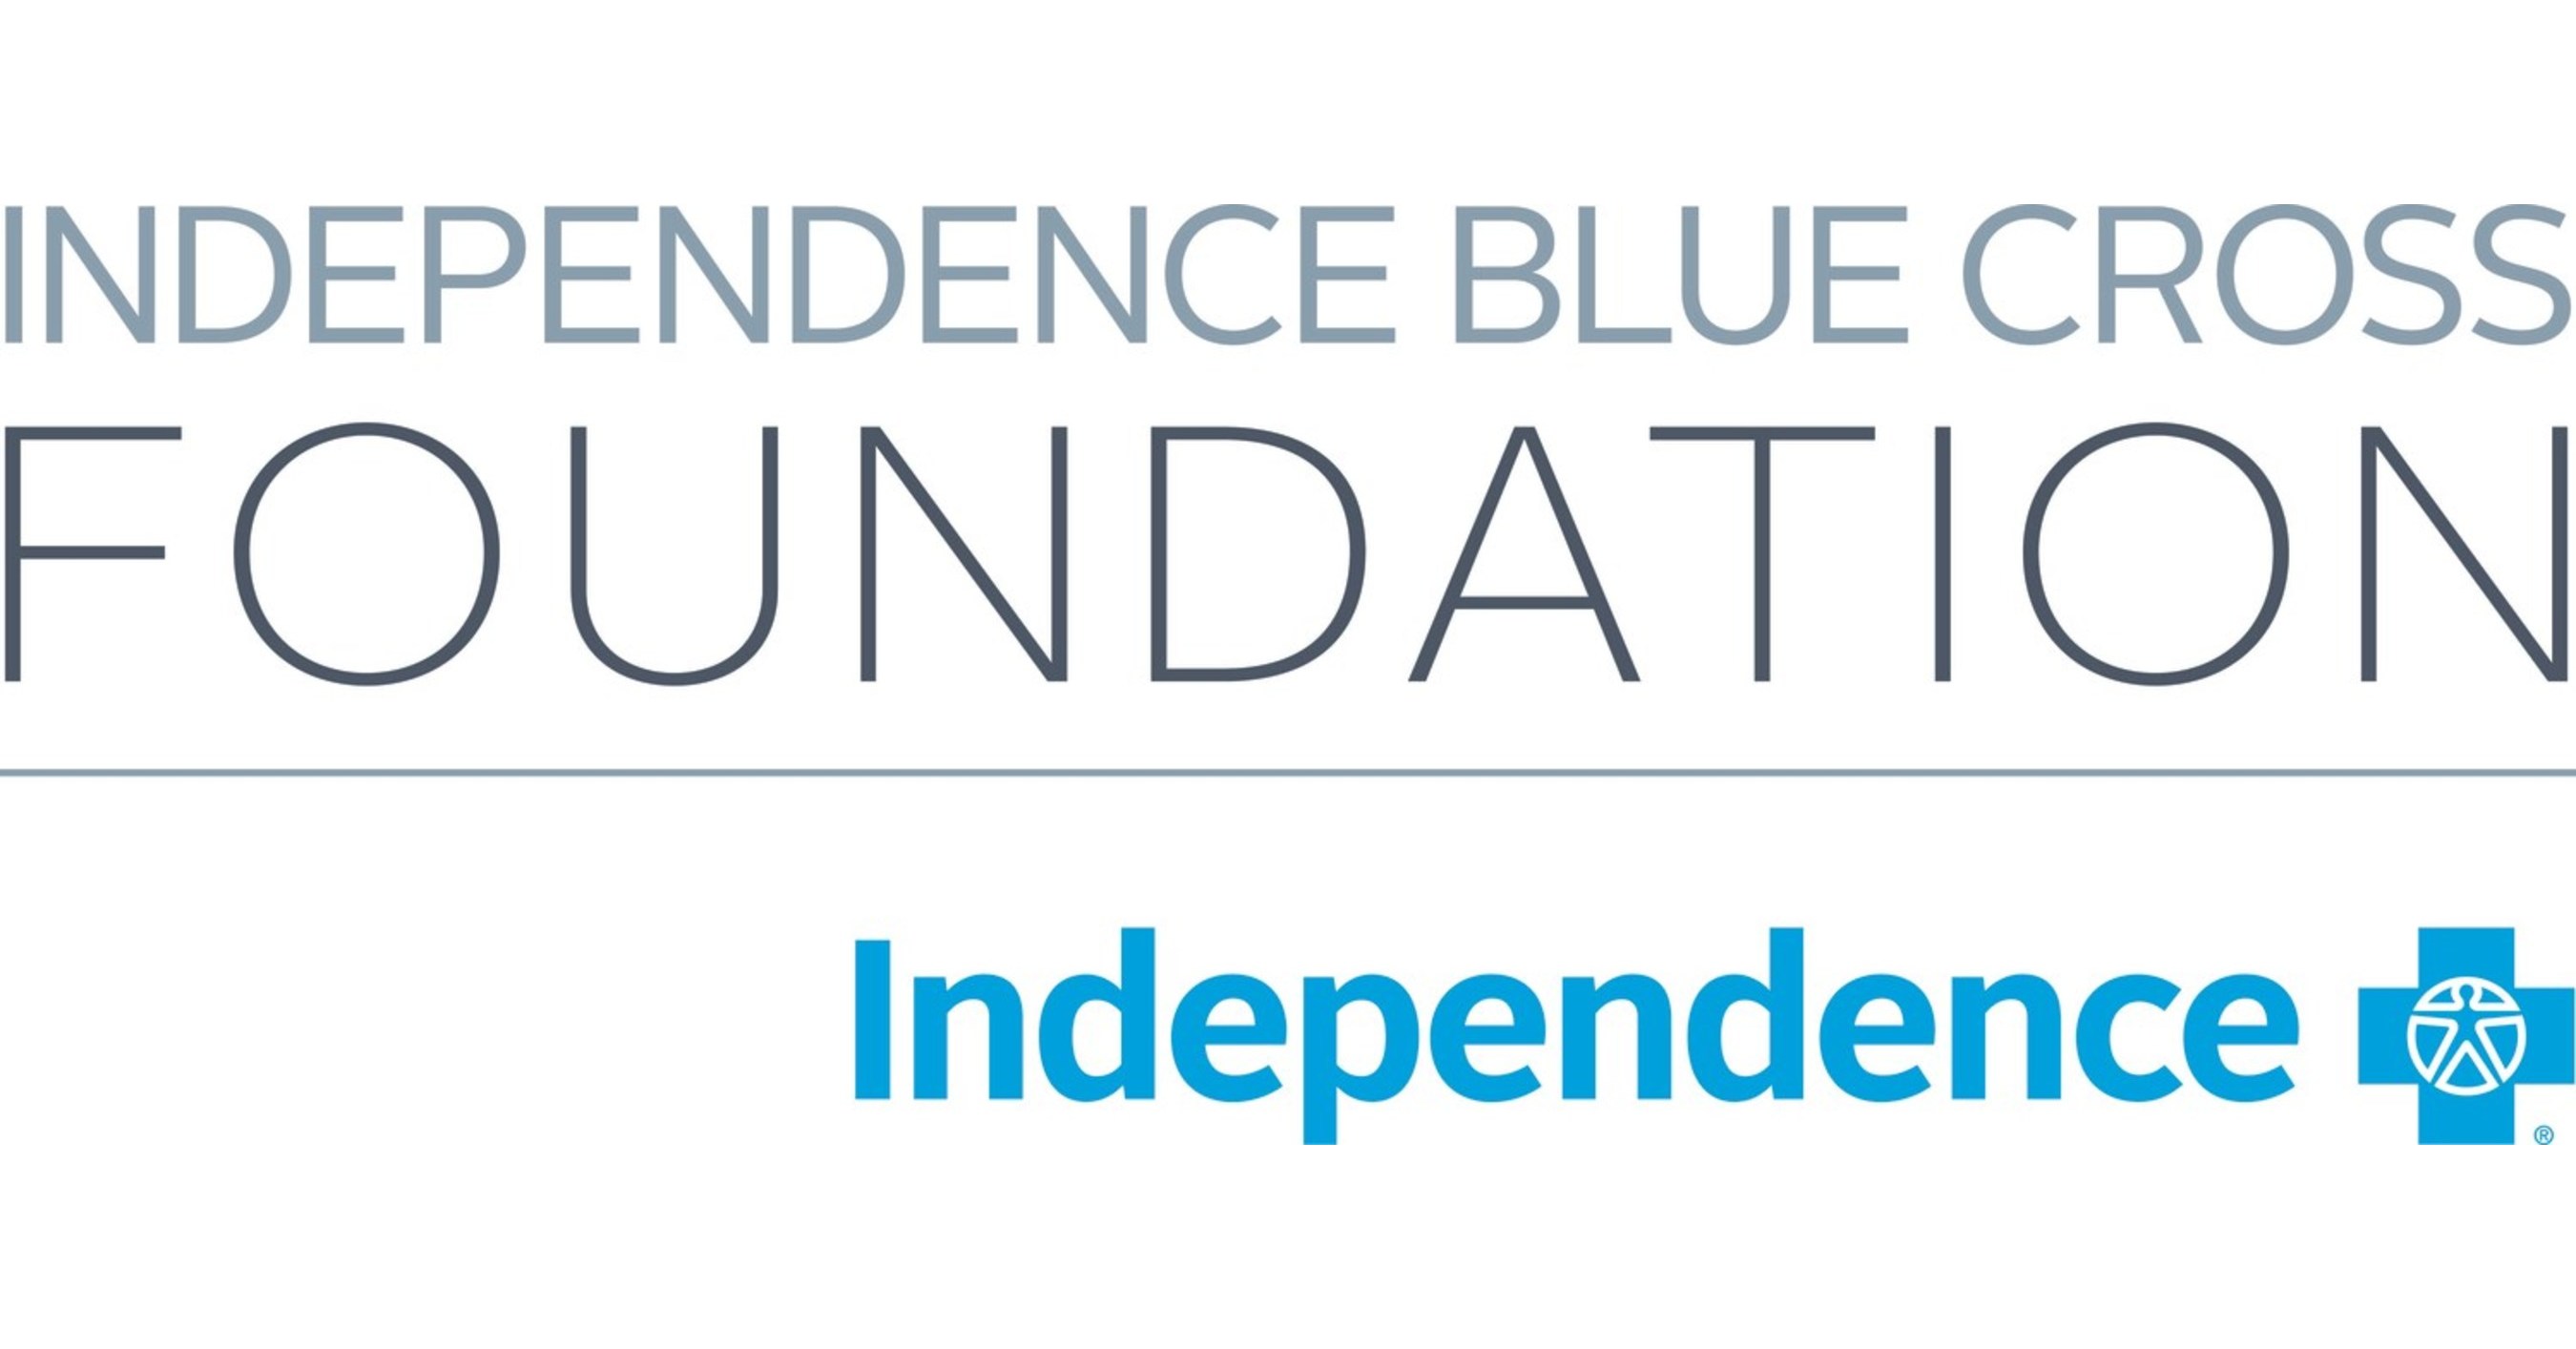 Independence Blue Cross announced as first-ever Philadelphia